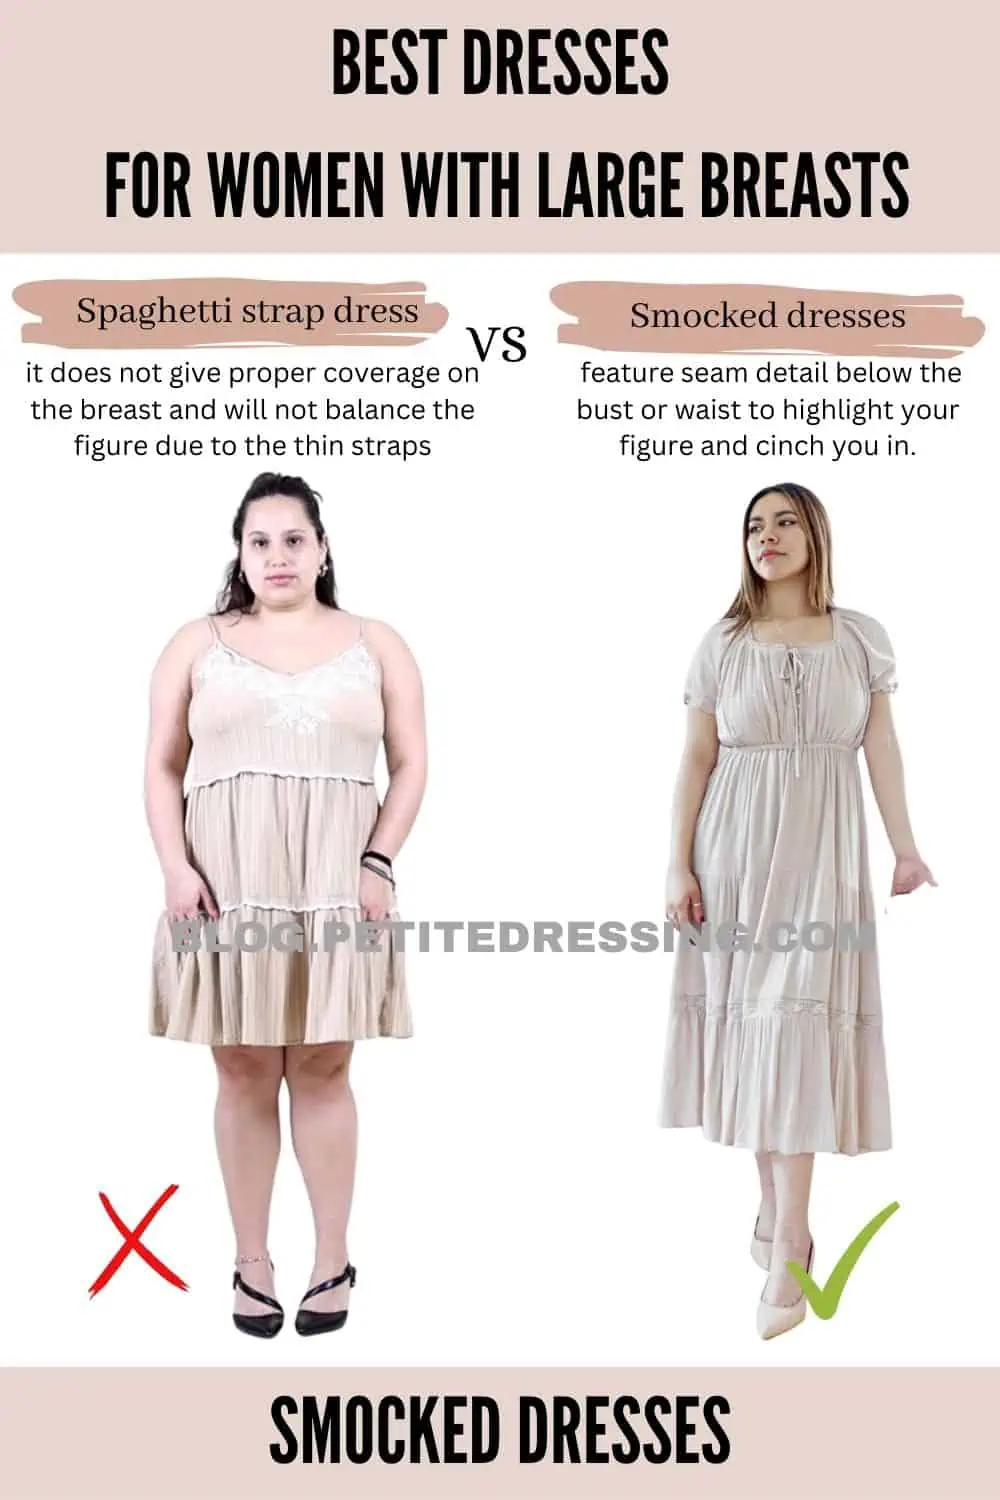 The Complete Dress Guide for Women with Large Breasts - Petite Dressing